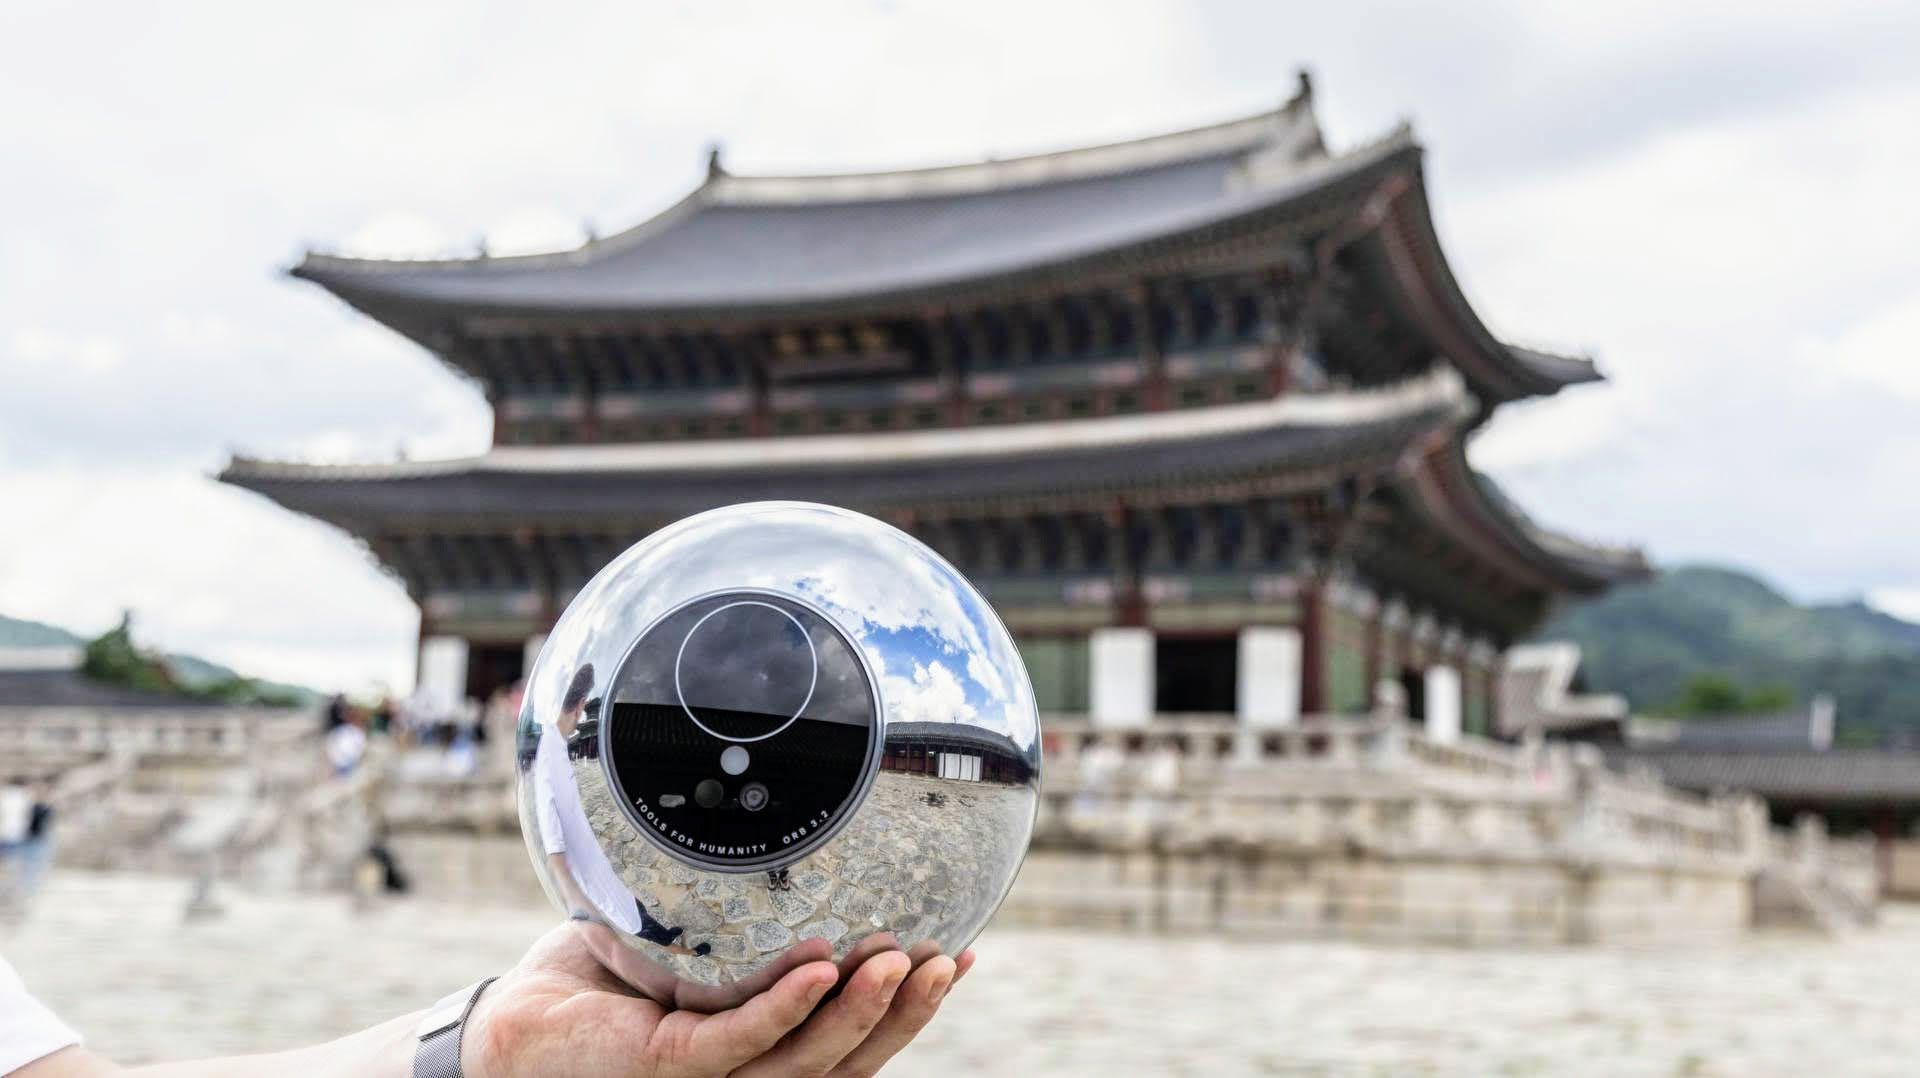 What is Worldcoin Orb? Keep reading and explore everything you need to know about the eye scanner. Does Worldcoin hurt? Let's find out!